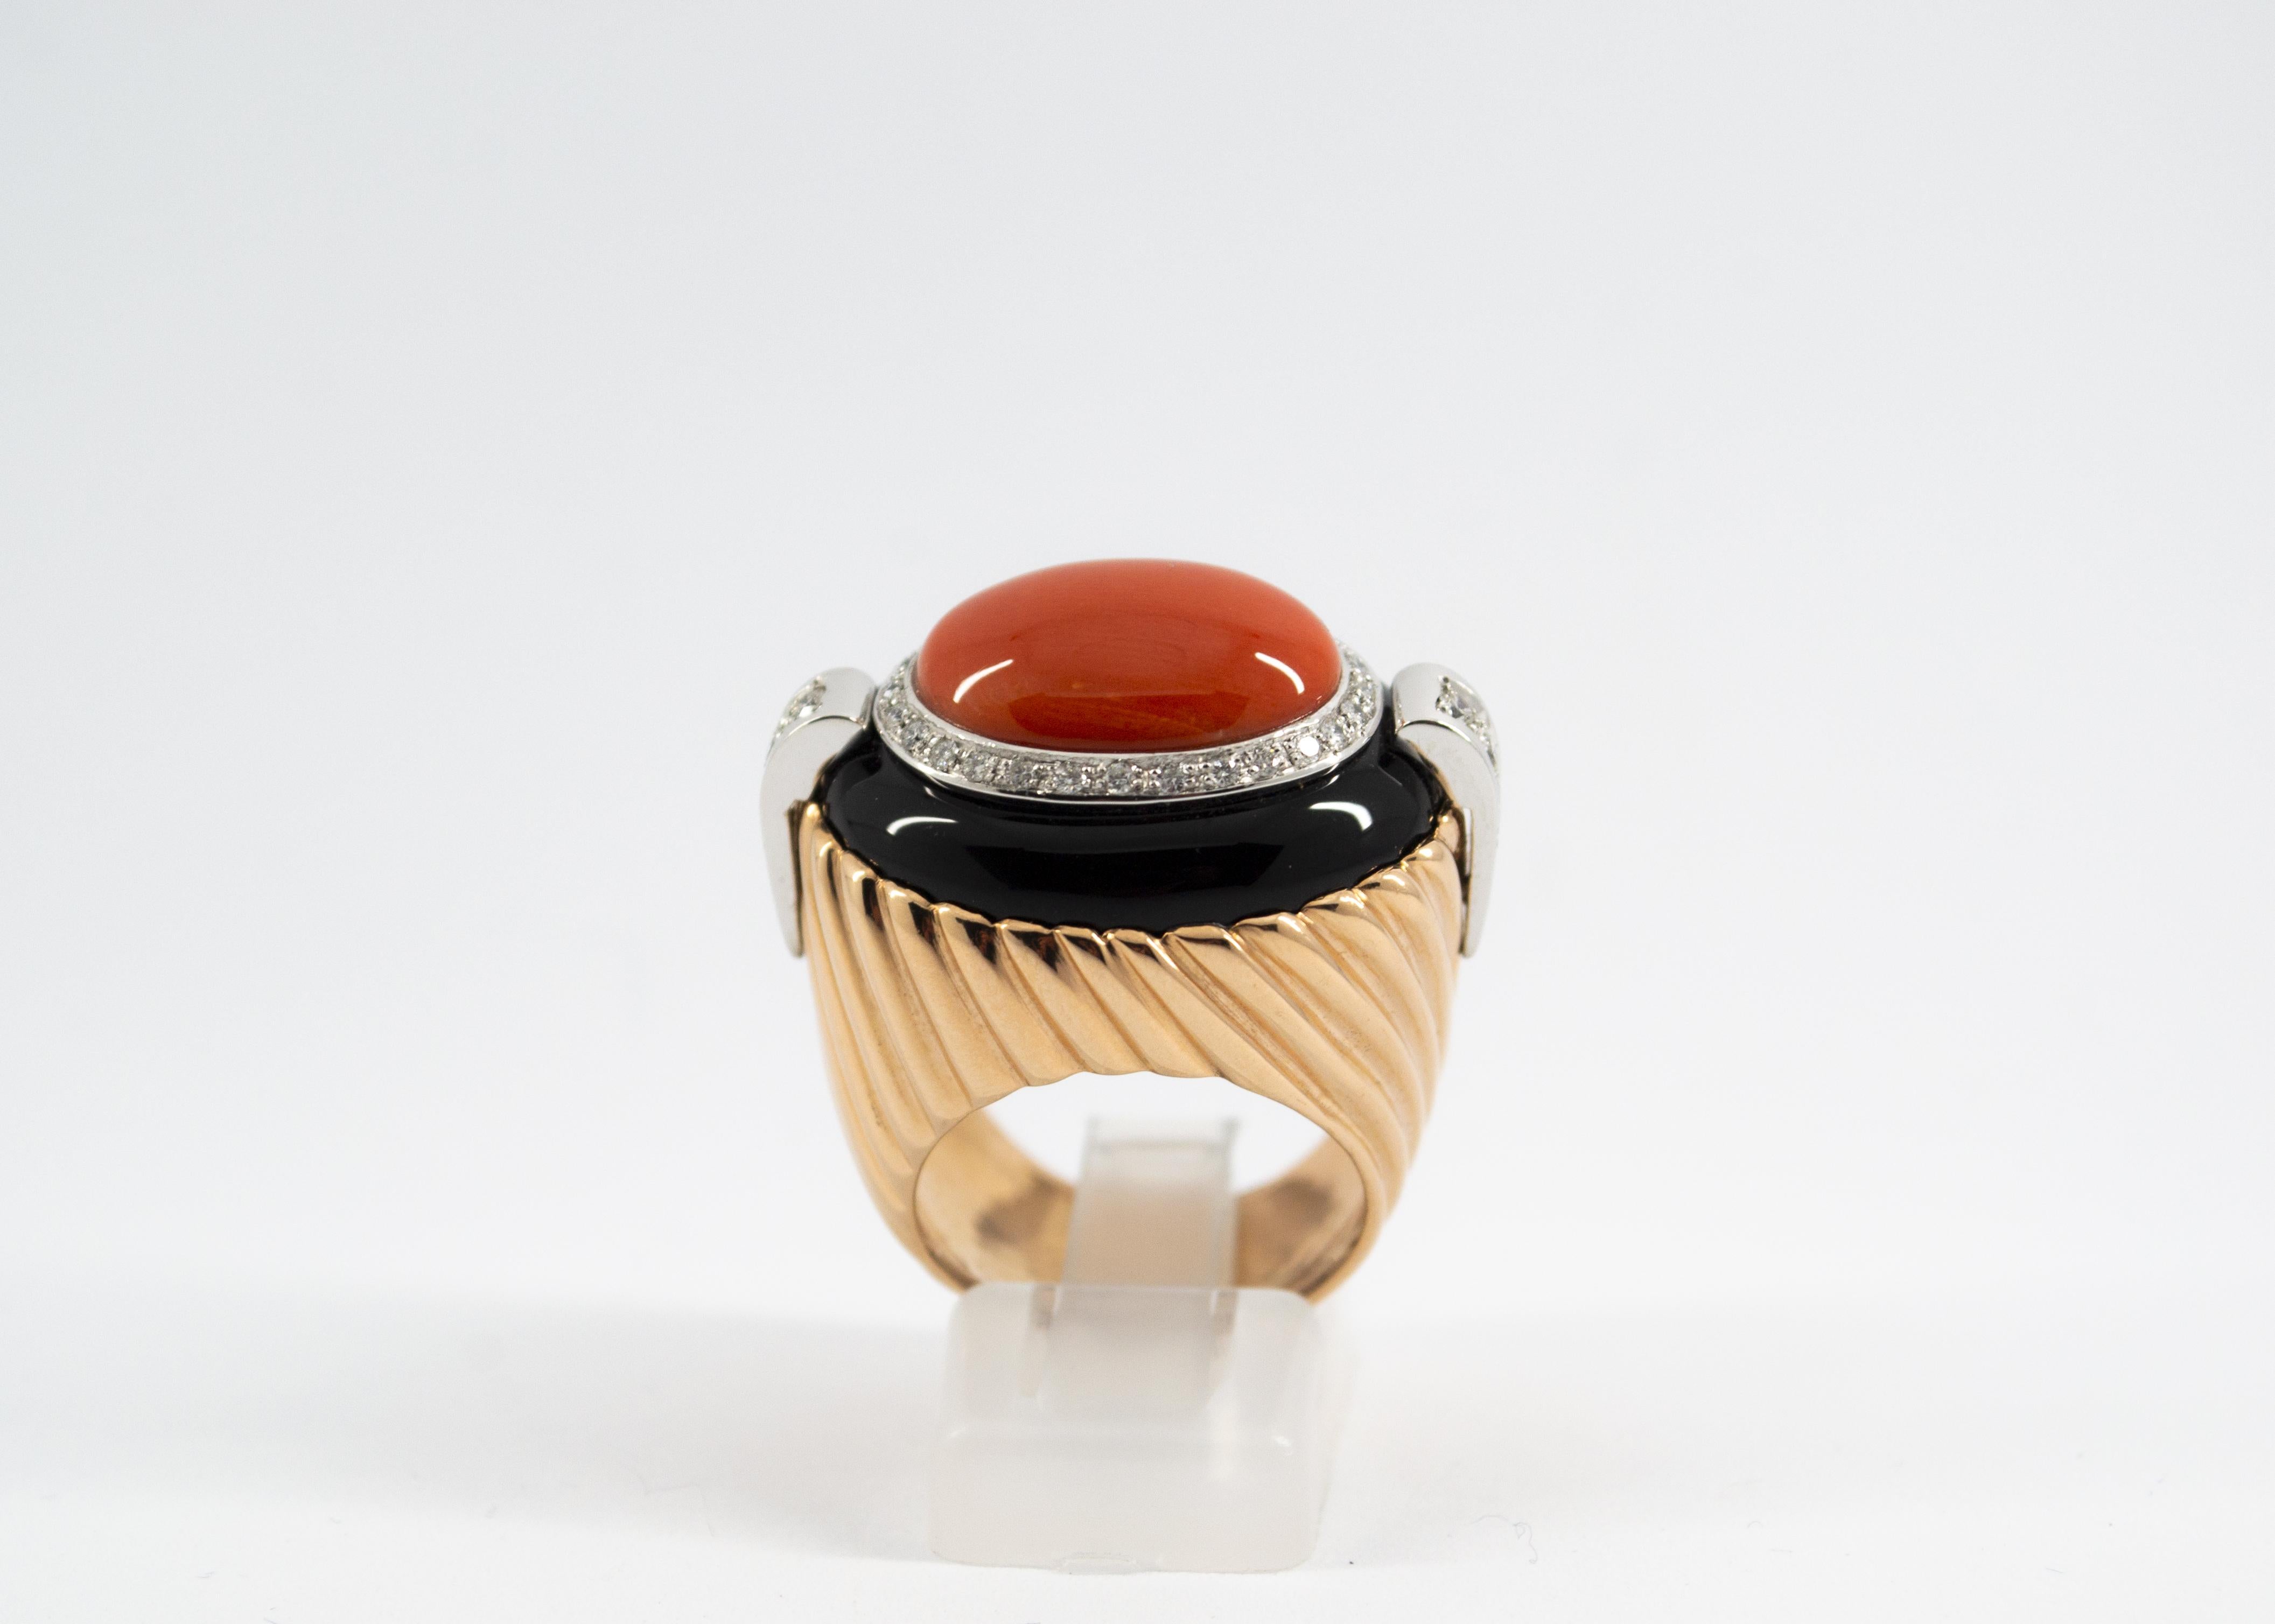 This Ring is made of 14K Yellow Gold.
This Ring has 0.40 Carats of Diamonds.
This Ring has also a big Red Mediterranean (Sardinia, Italy) Coral and Onyx.
This Ring is inspired by Renaissance Style.
Size ITA: 14 USA: 7
We're a workshop so every piece